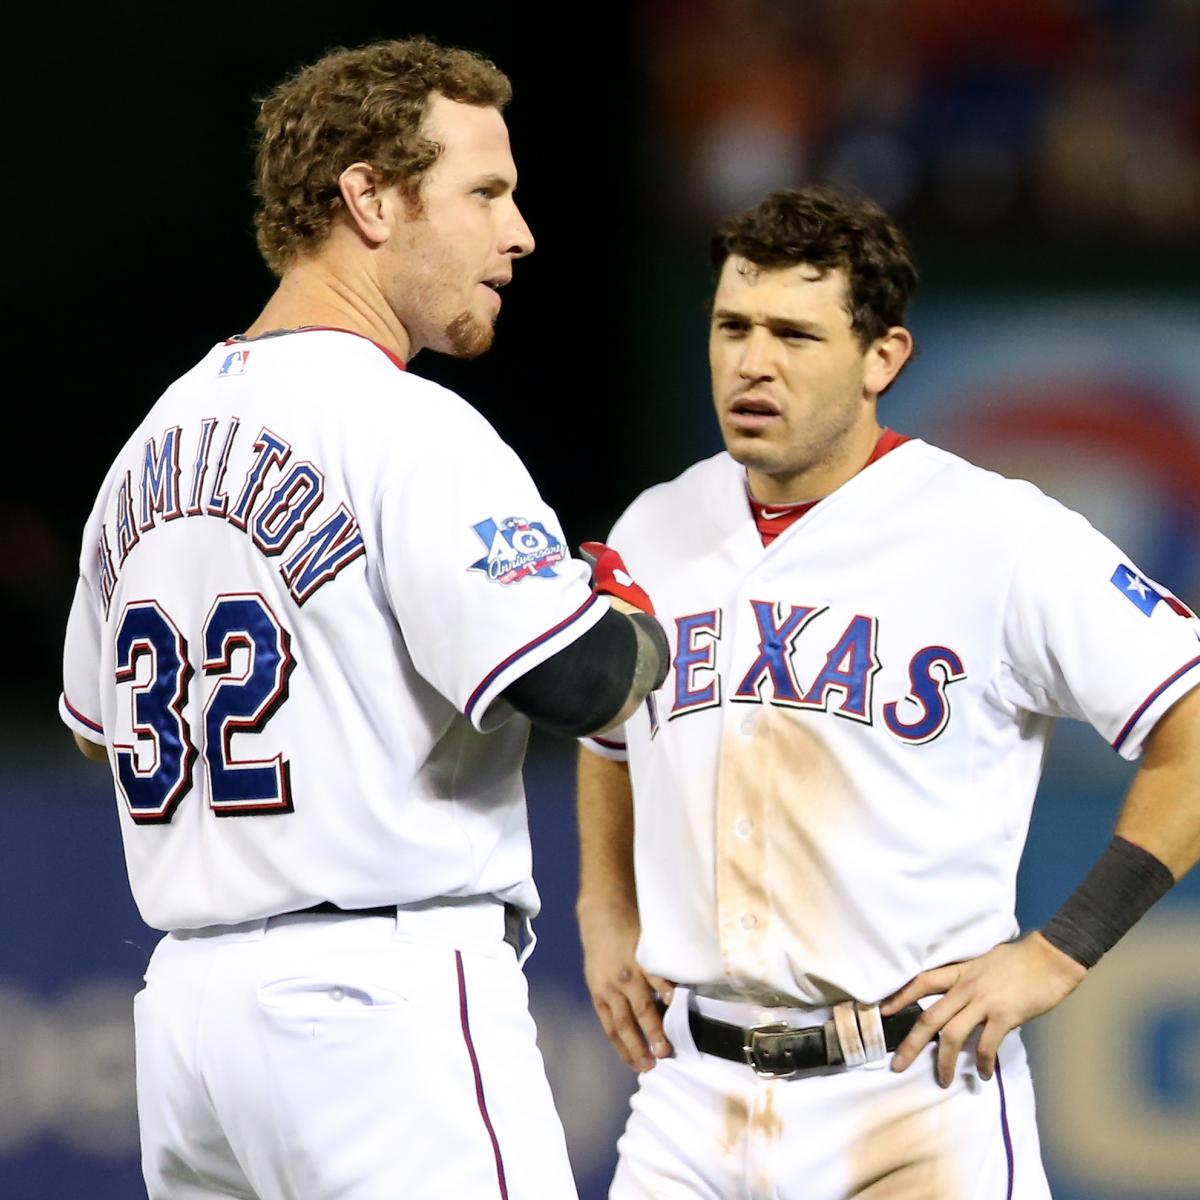 MLB's decision on Josh Hamilton could come as early as next week